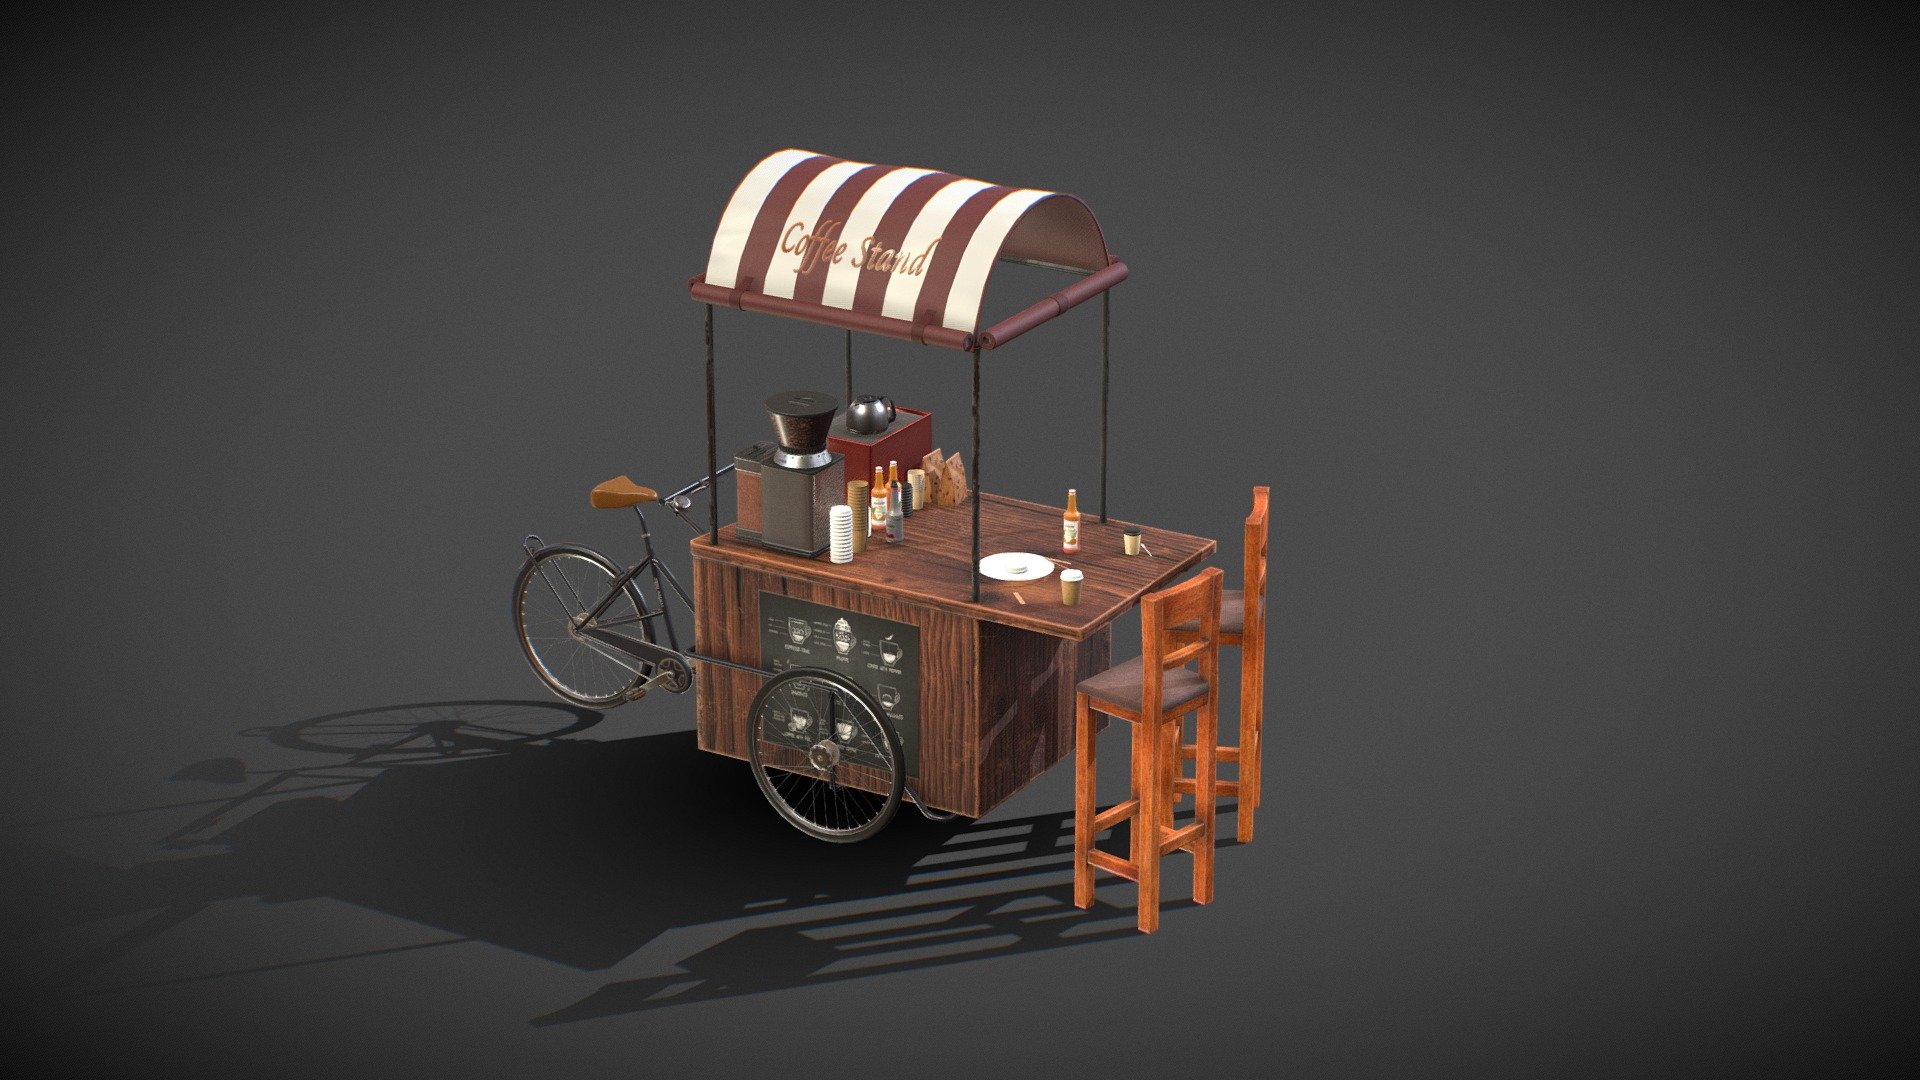 Free Low poly asset perfectly optimized and mapped to represent a higher polygon density. You can use it in VR, smartphone games, or environments where few polygons are needed. Intended for use in graphics engines such as Unity and Unreal Engine, with the current configuration of PBR materials.

*file size is heavy due to 2k textures.


Coffee Tricycle:  7652 triangles.
Coffee Stand:  1868 triangles.
Coffee Machine: 3456 triangles.
Coffee Grinder : 1182 triangles.
Coffee Maker: 739 triangles.
Coffee Props: 2432 triangles.
Chair: 508 triangles.

Developed by Outlier Spa 3d model